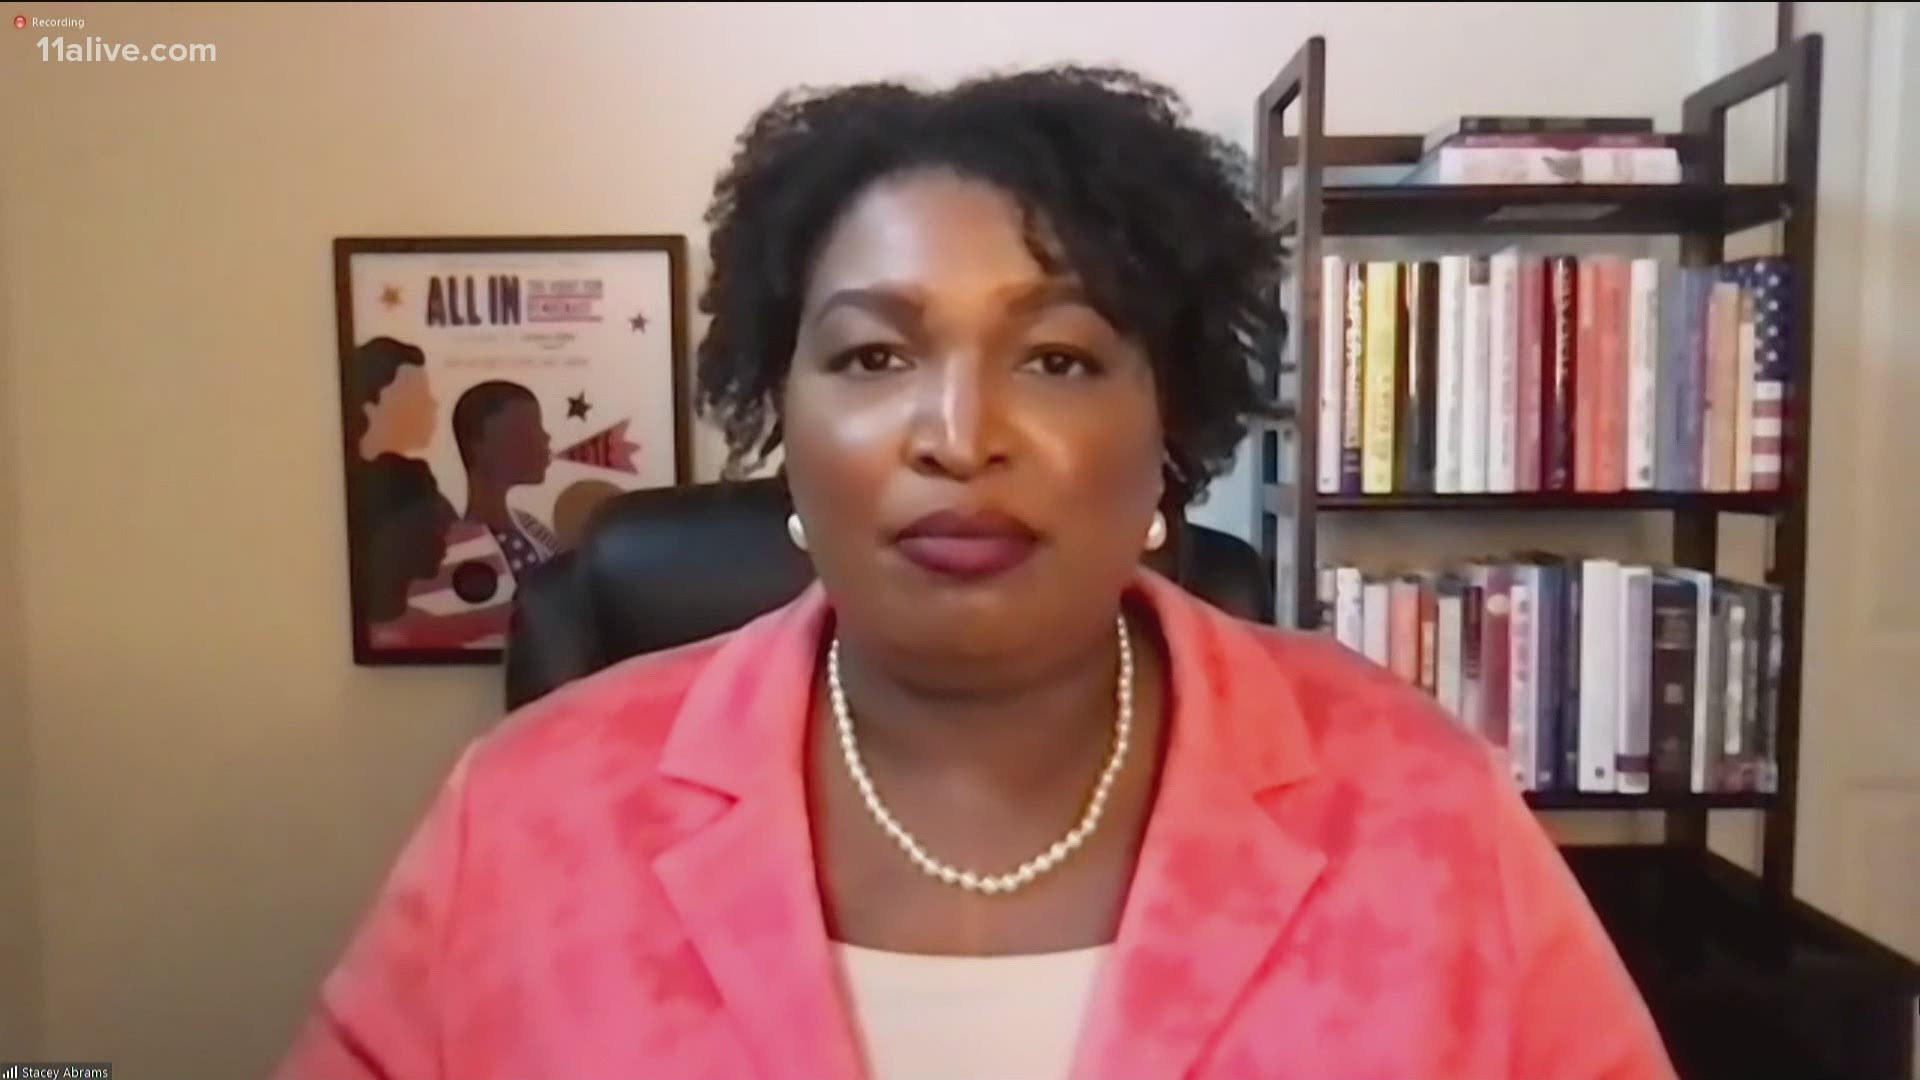 Stacey Abrams has been hailed as the architect who turned Georgia blue. The one-time Georgia gubernatorial candidate said this is only the beginning.